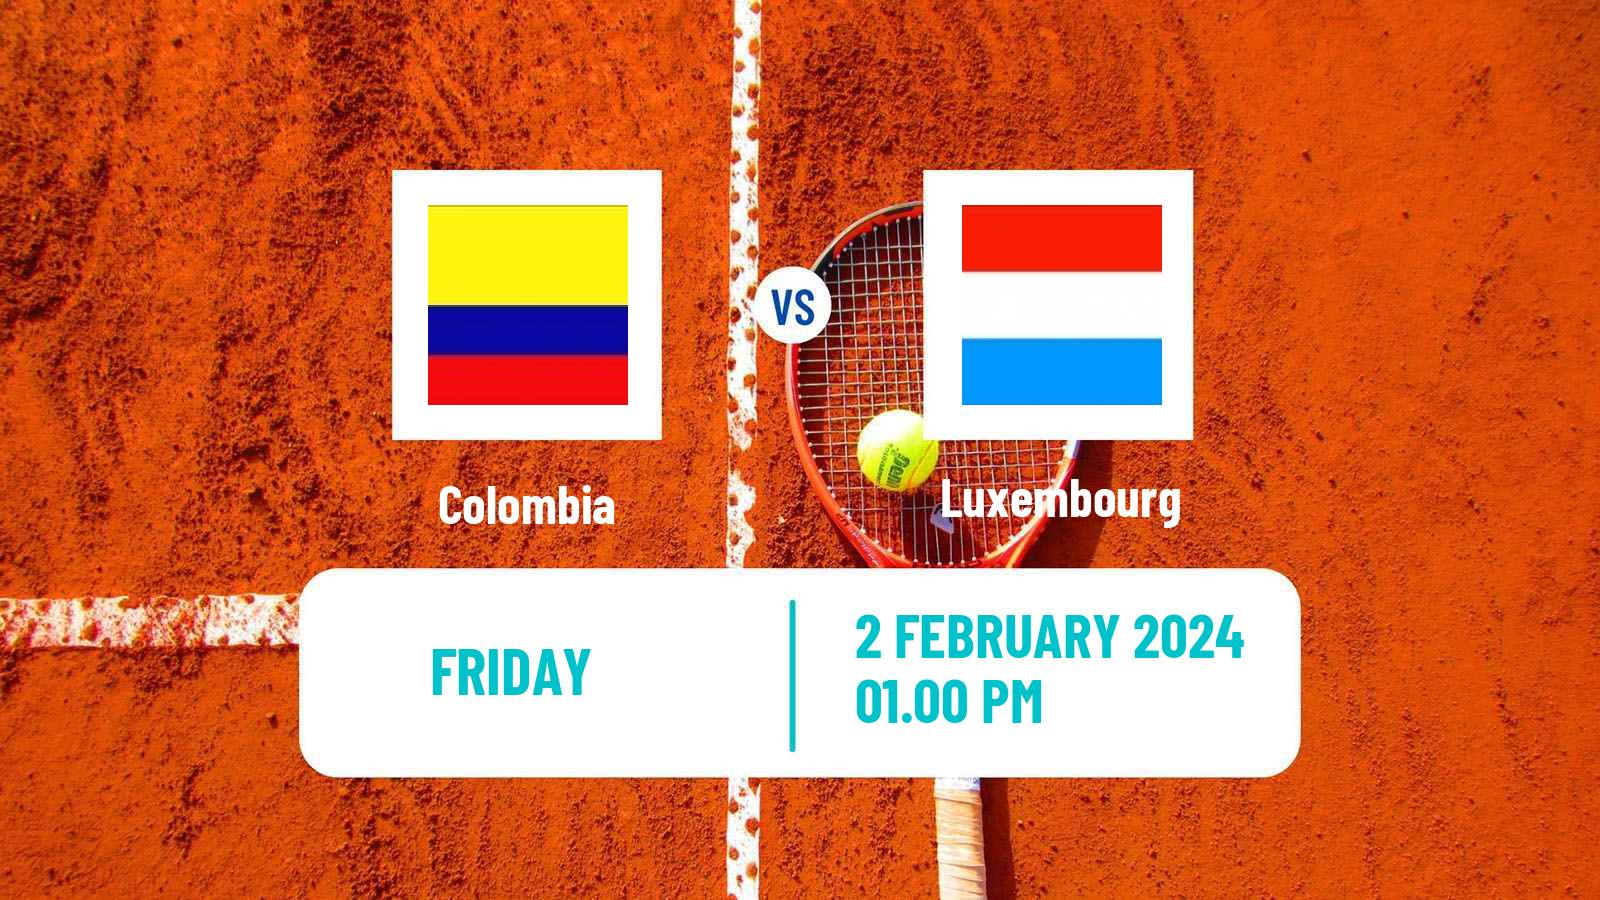 Tennis Davis Cup World Group I Teams Colombia - Luxembourg